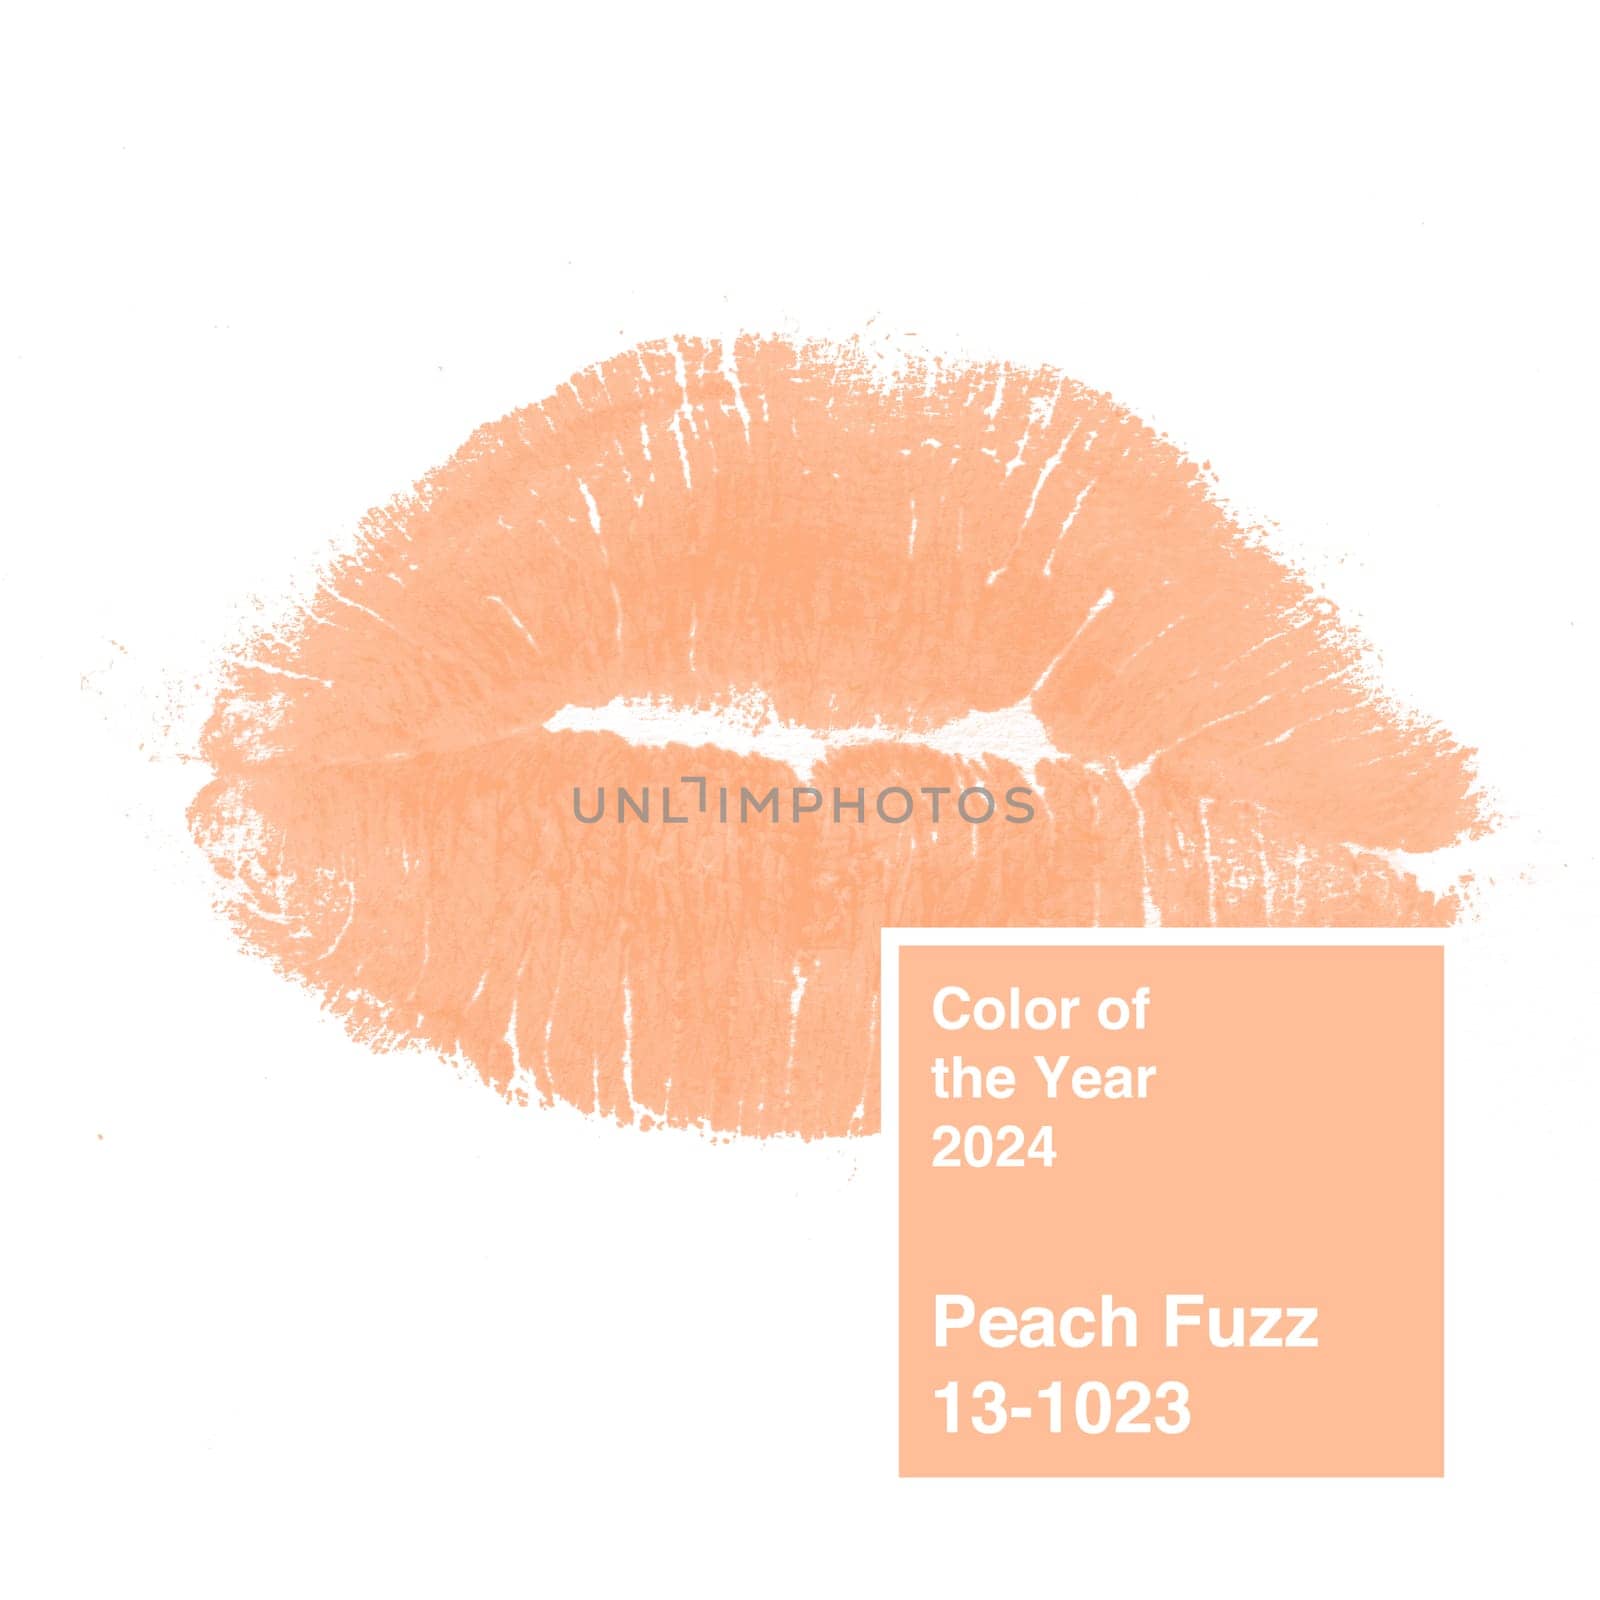 Peach fuzz color lips kiss isolated on white background. Color of the Year 2024 by Fabrikasimf